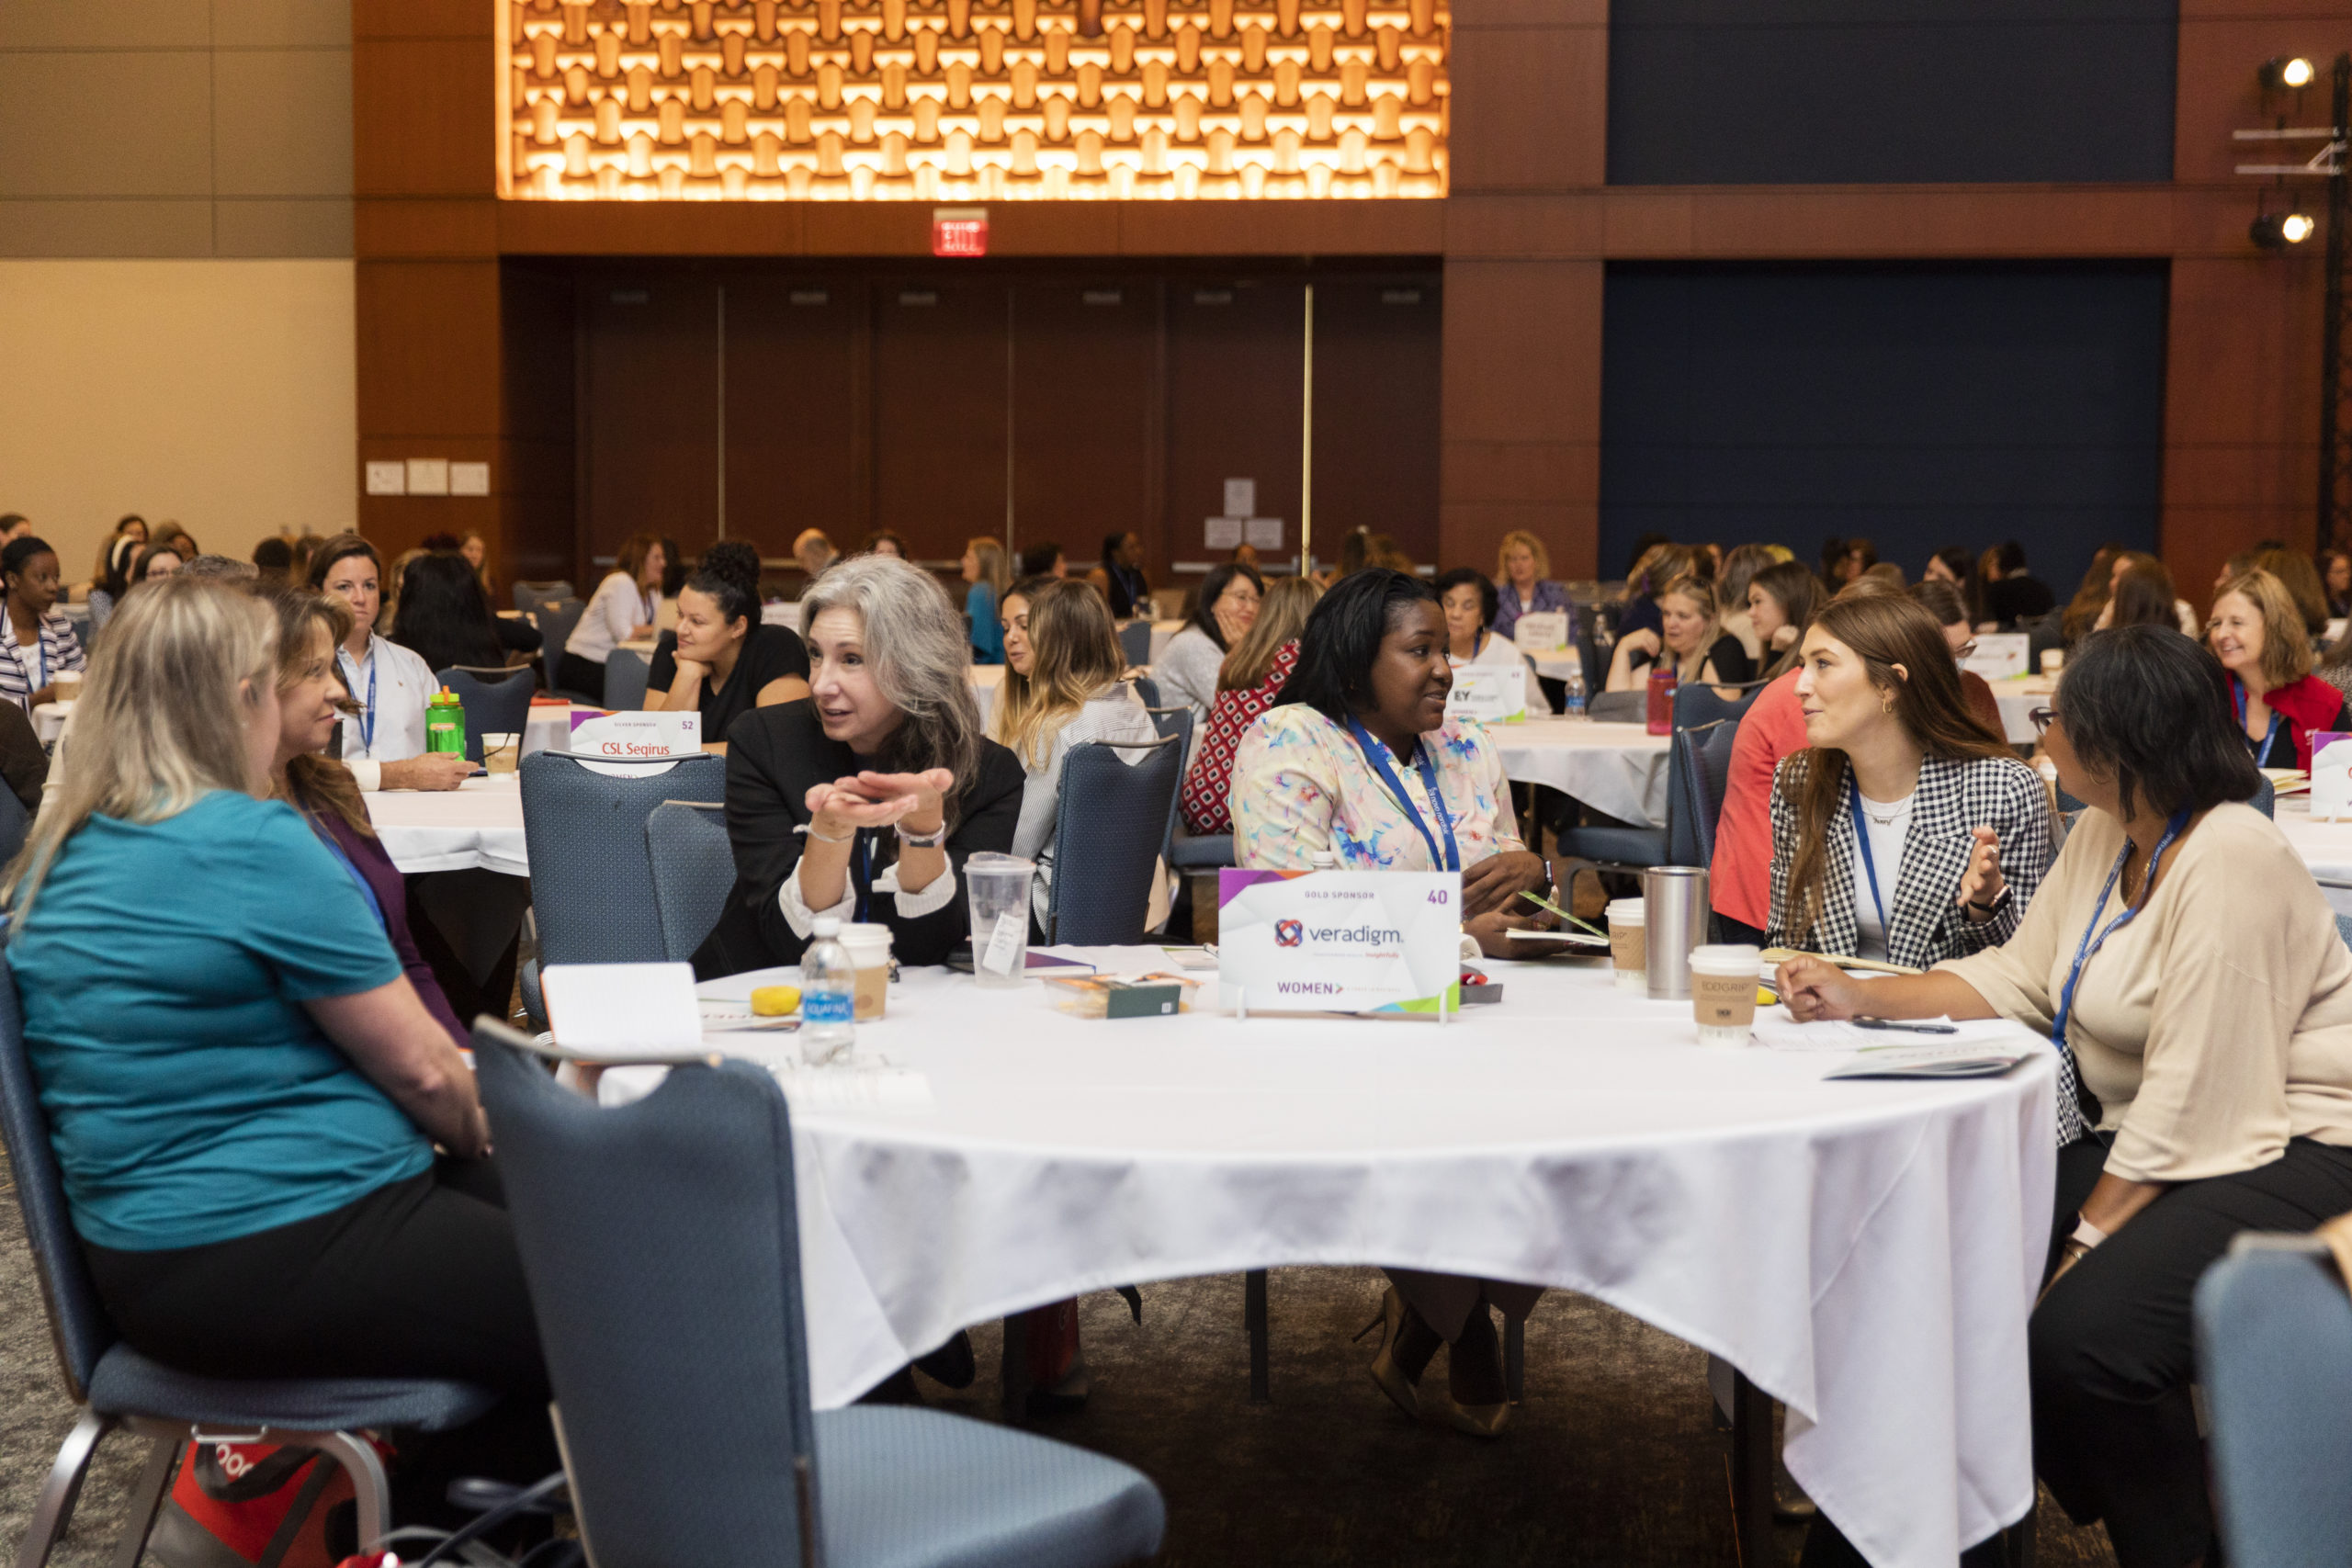 Women’s Business Conference Focuses on Building Female Leadership and